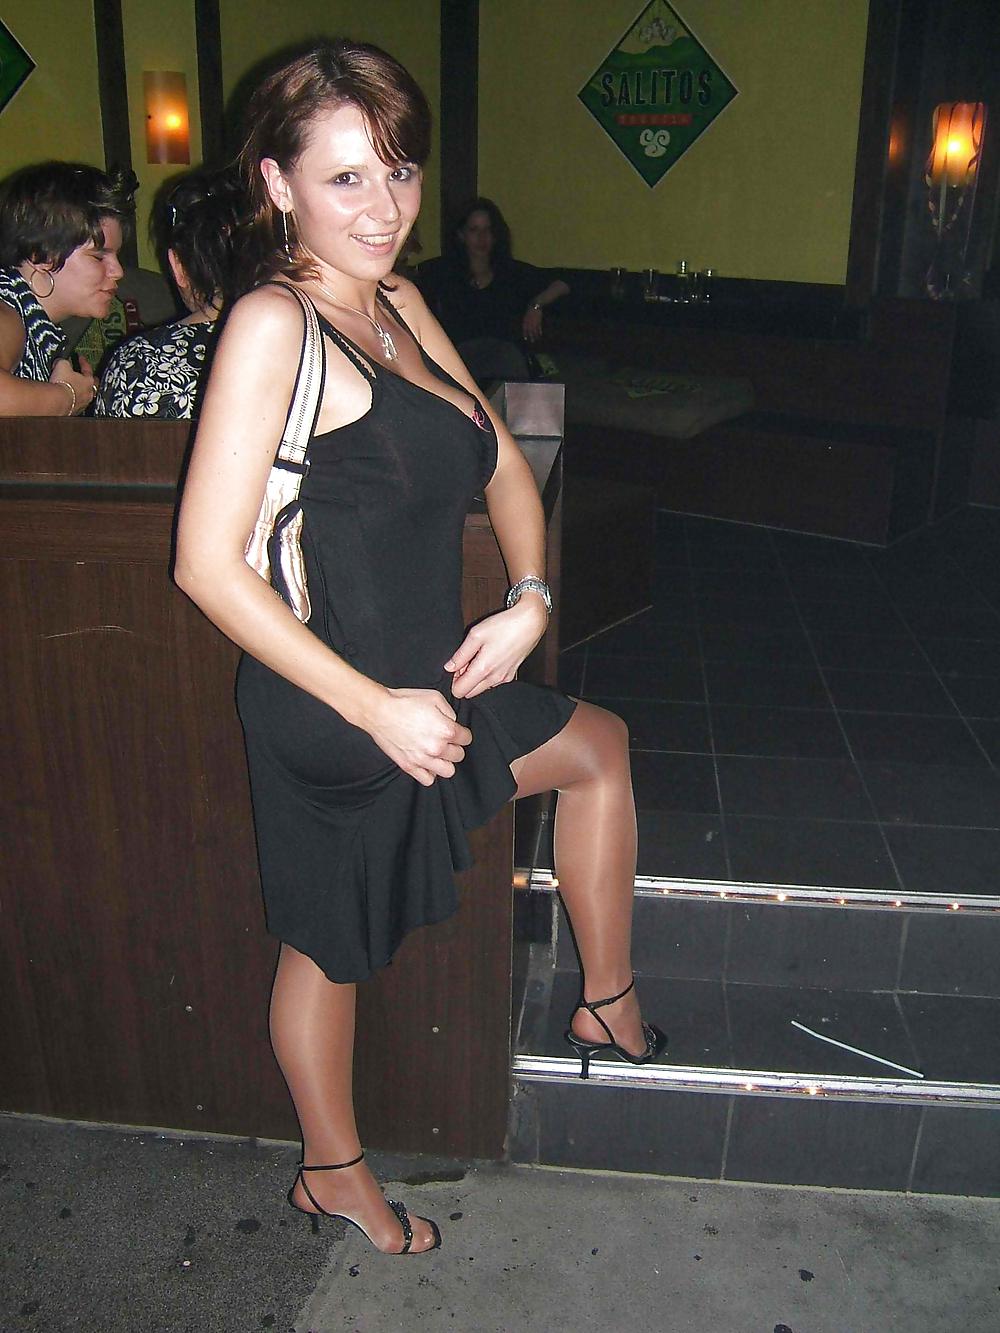 Sluts in nylons came to our Bar for Sex & more #22336940